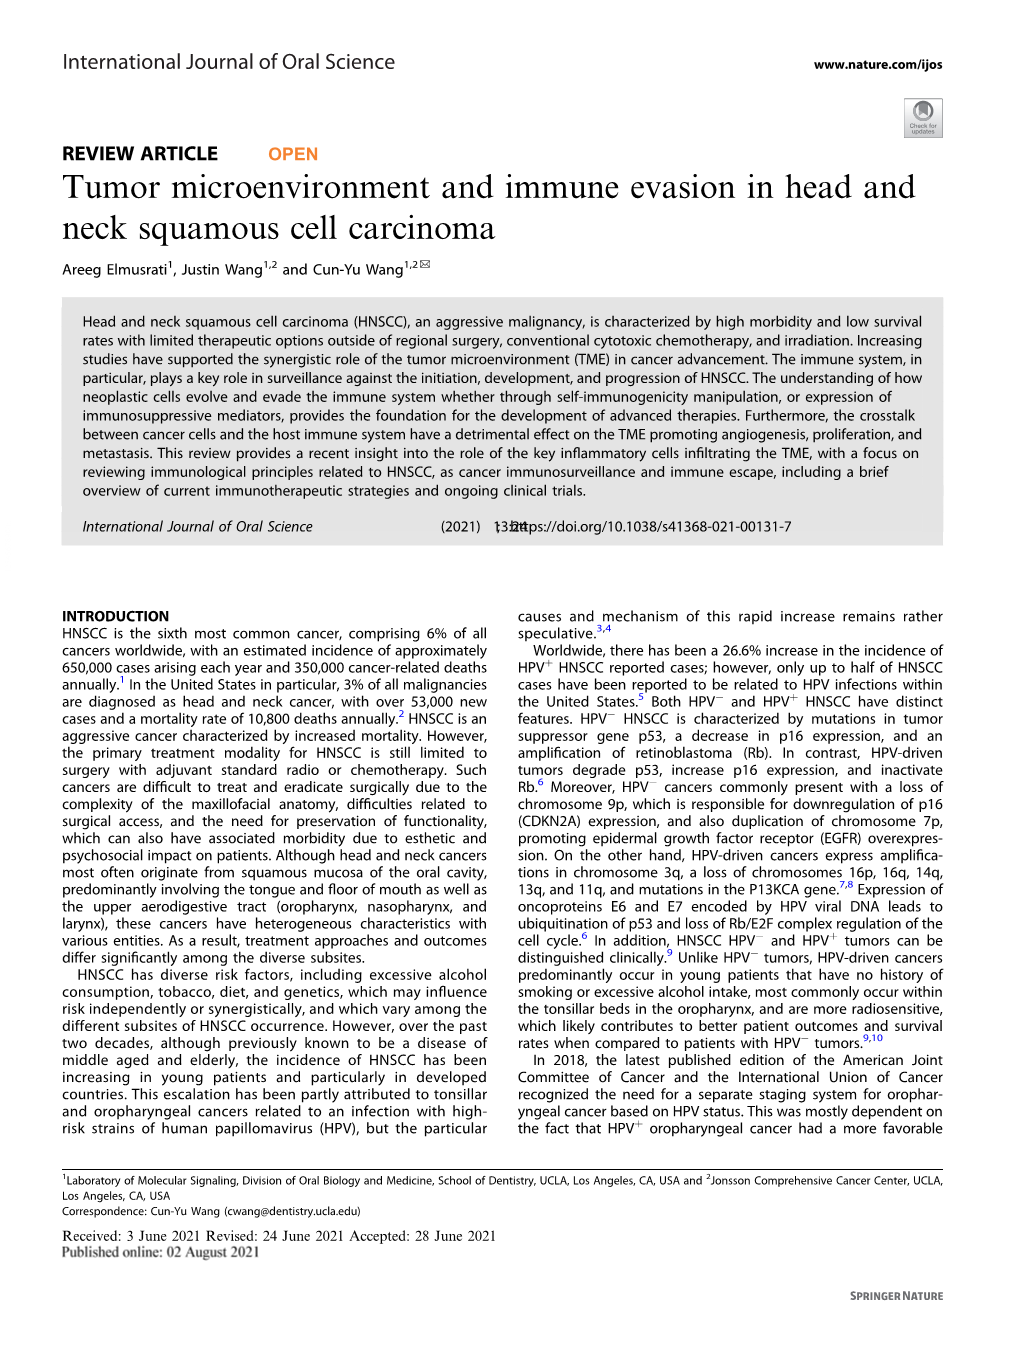 Tumor Microenvironment and Immune Evasion in Head and Neck Squamous Cell Carcinoma ✉ Areeg Elmusrati1, Justin Wang1,2 and Cun-Yu Wang1,2